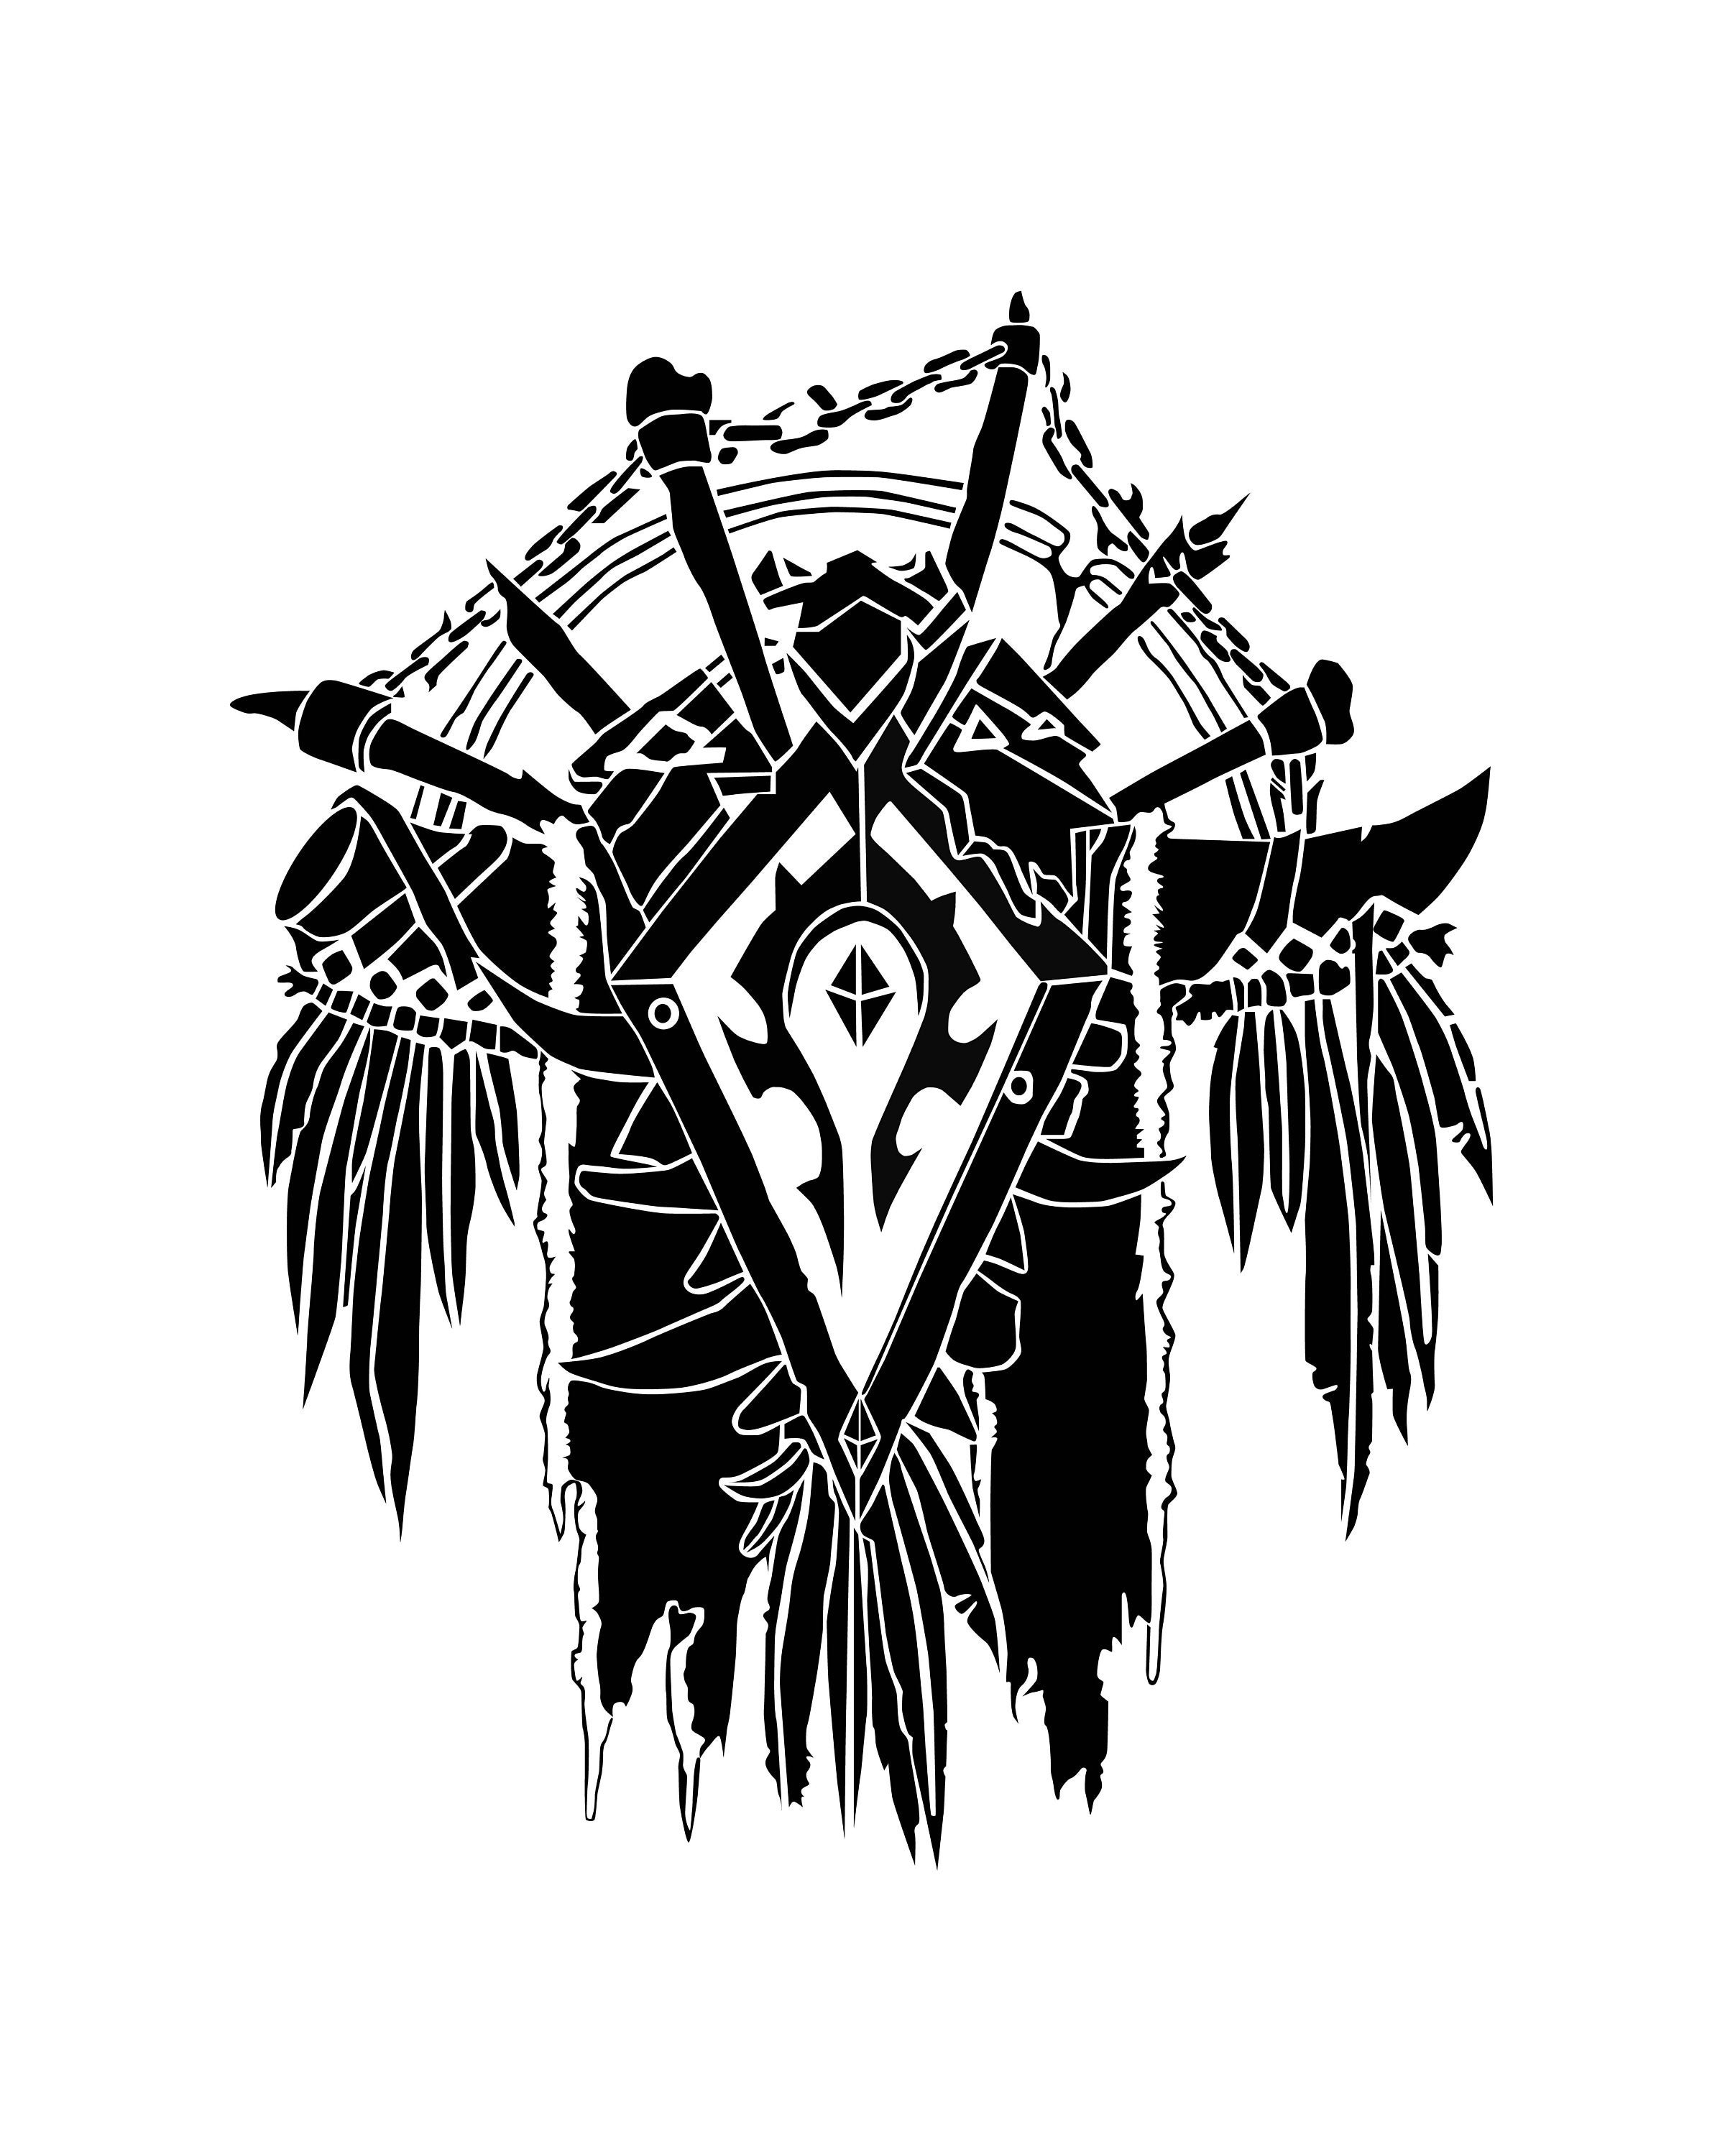 Where does the Horde symbol come from?